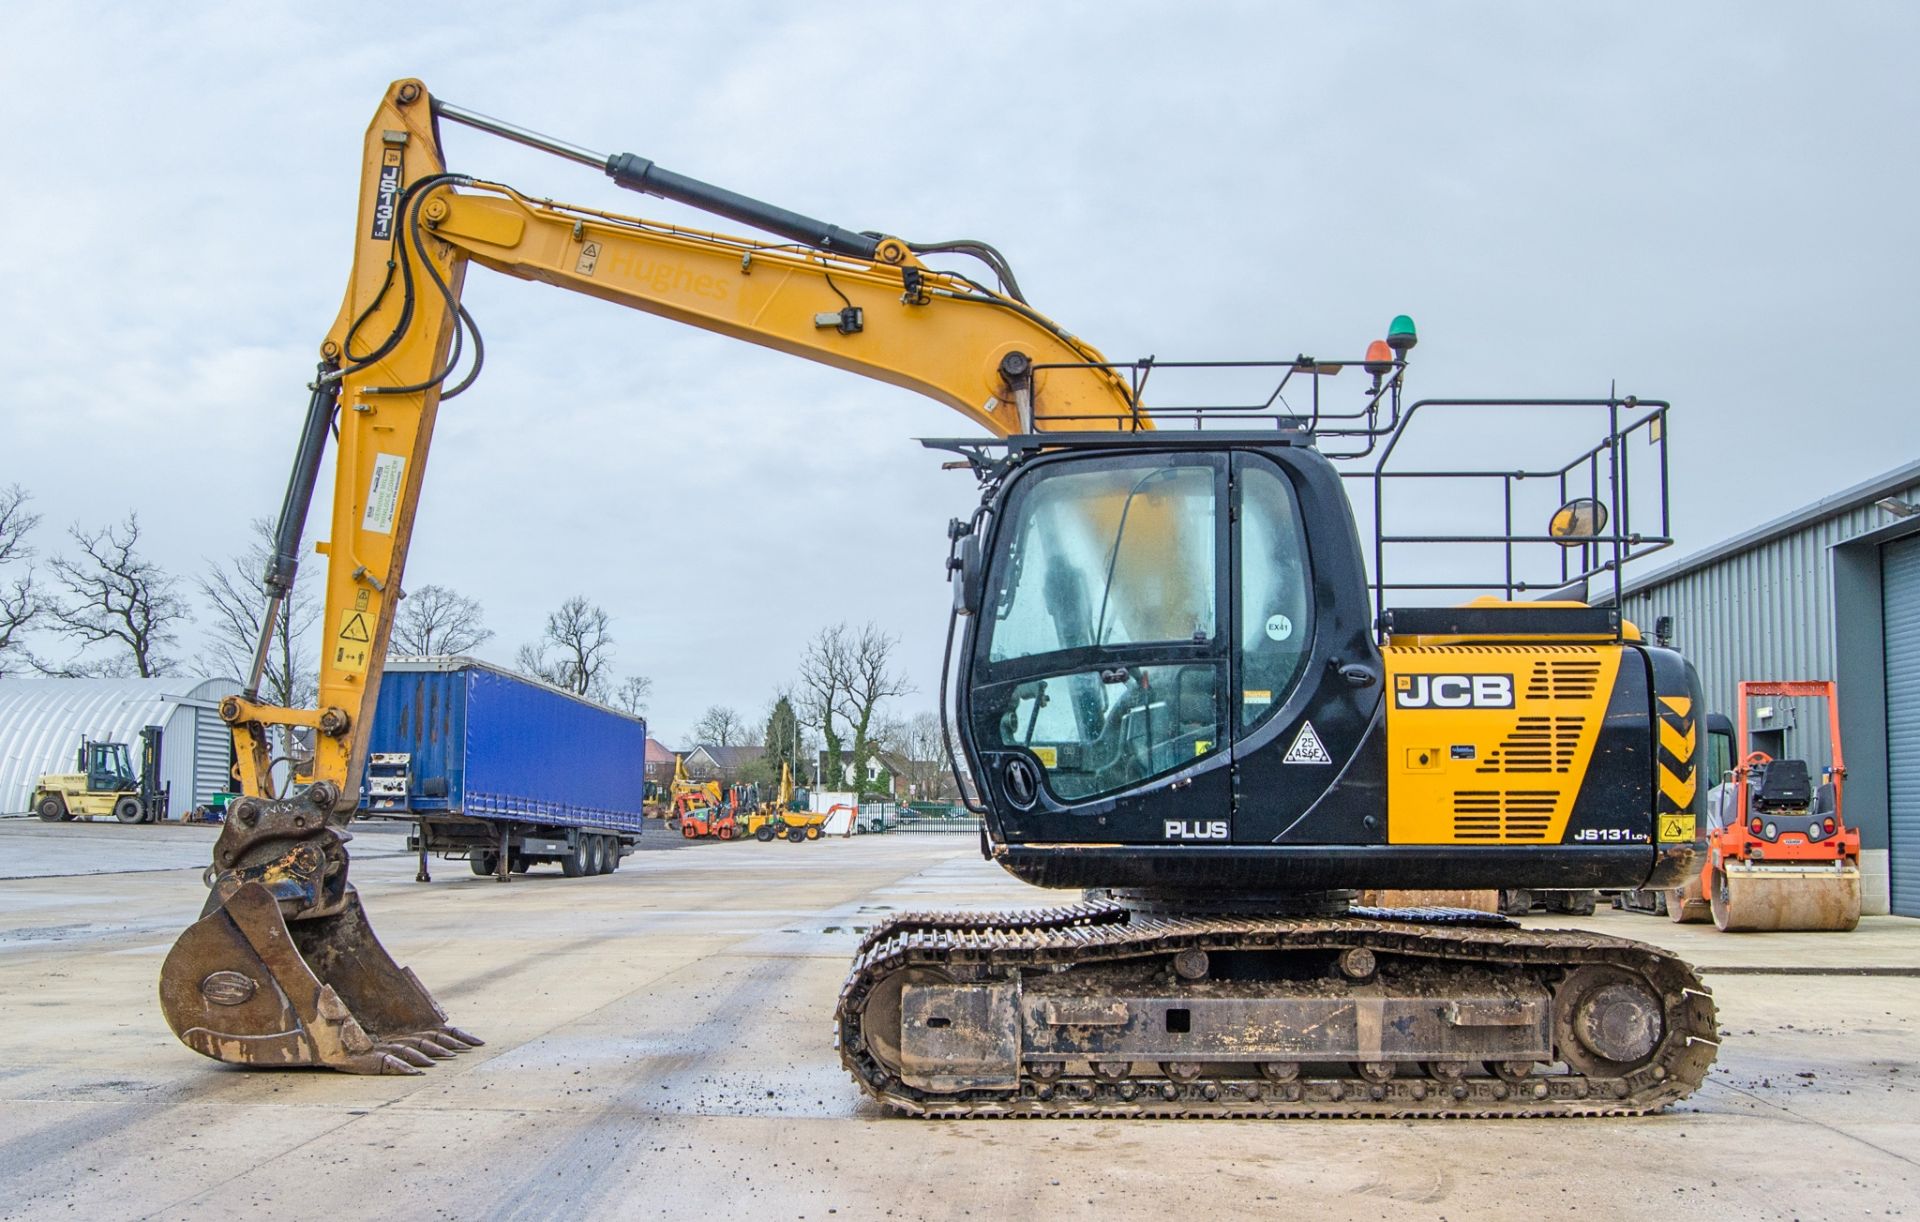 JCB JS131 LC+ 13 tonne steel tracked excavator Year: 2018 S/N: 2442347 Recorded Hours: 5575 piped. - Image 7 of 31